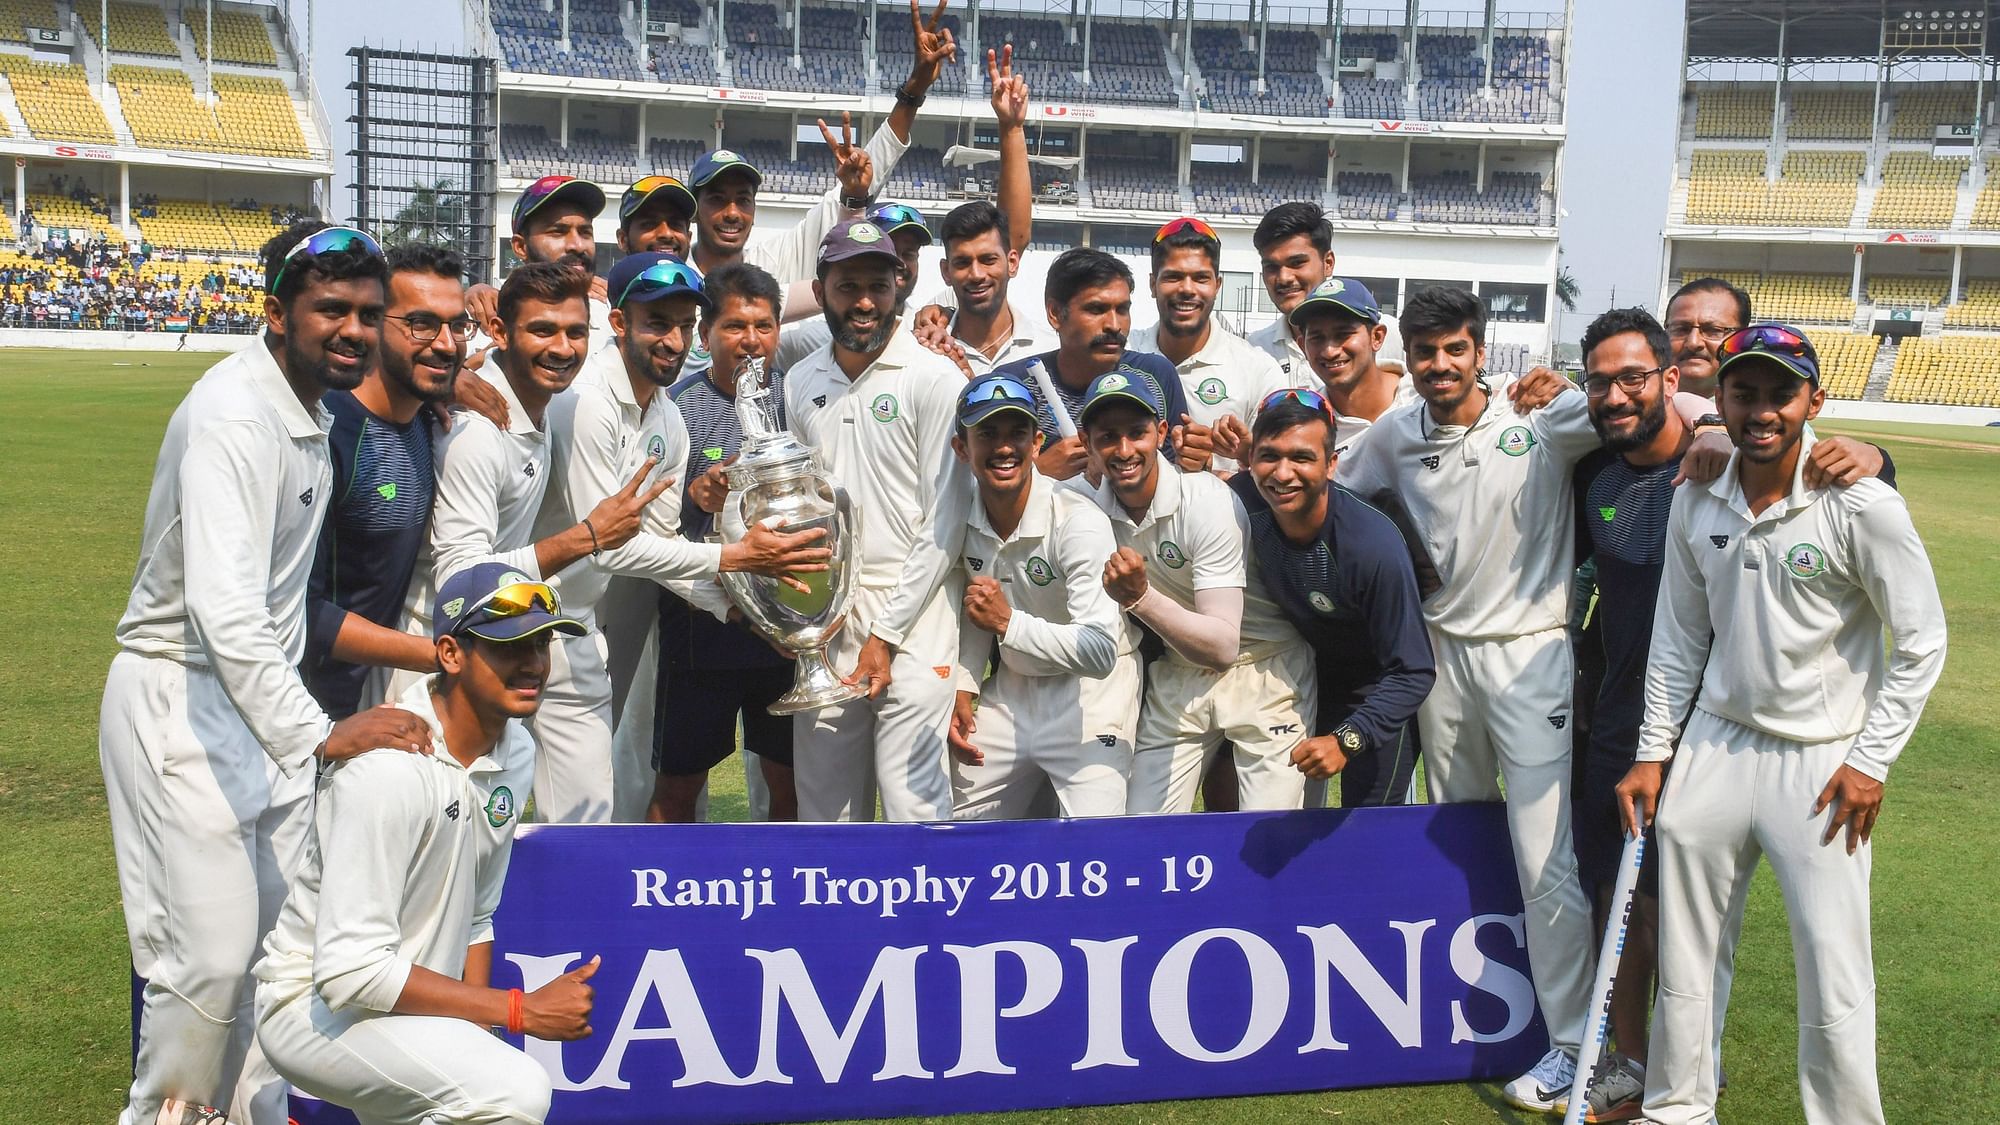 Defending champions Vidarbha defeated Saurashtra by 78 runs and retained the Ranji Trophy title.